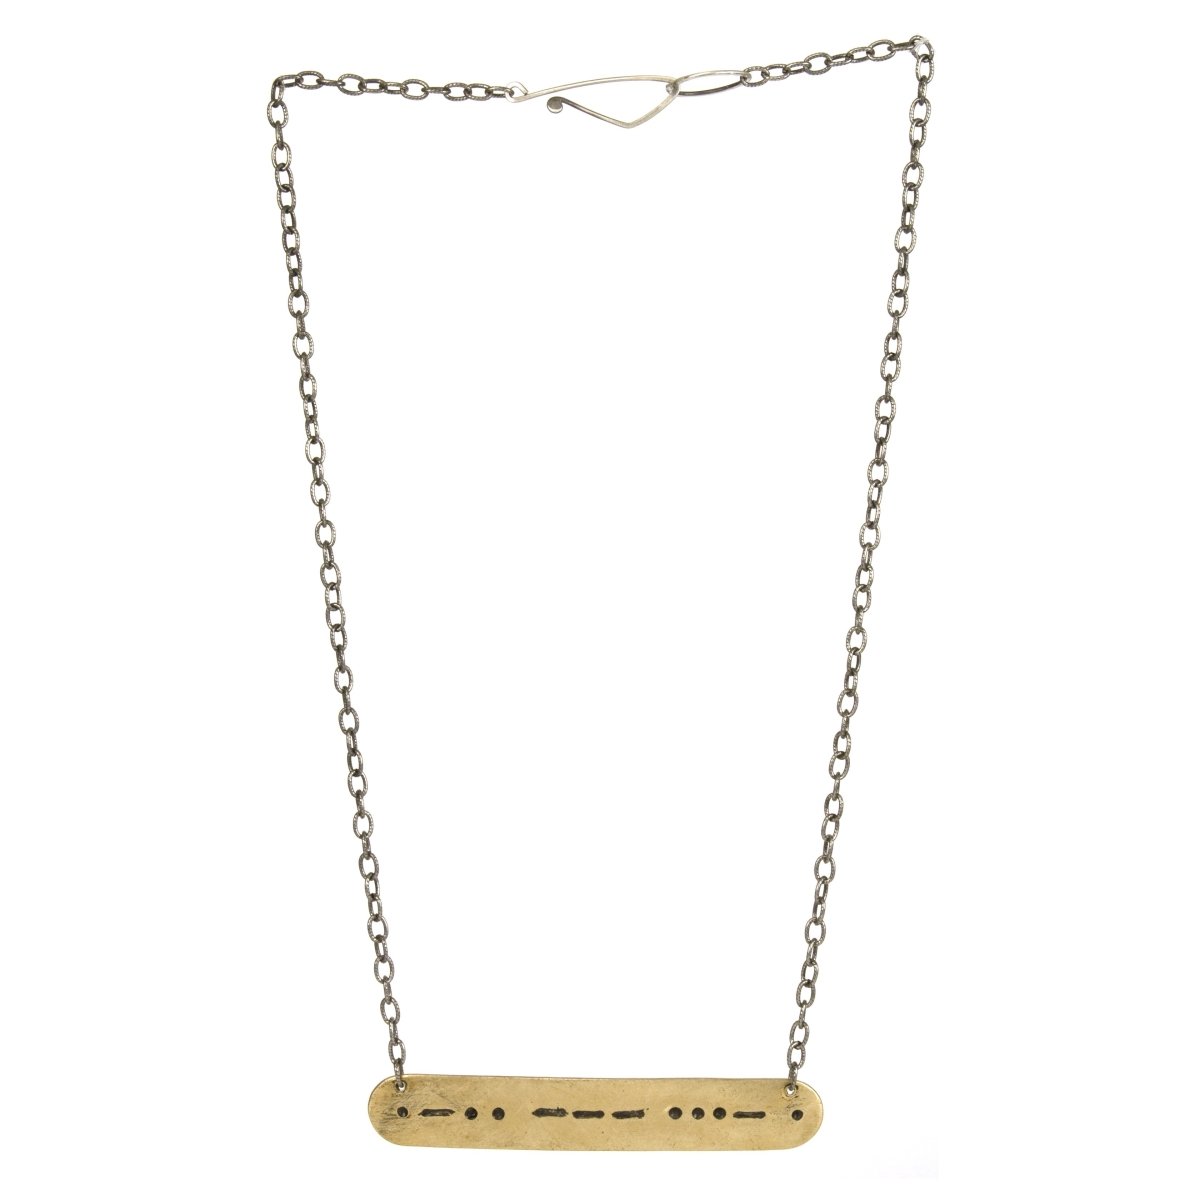 A long, full view of the betsy & iya morse code necklace.